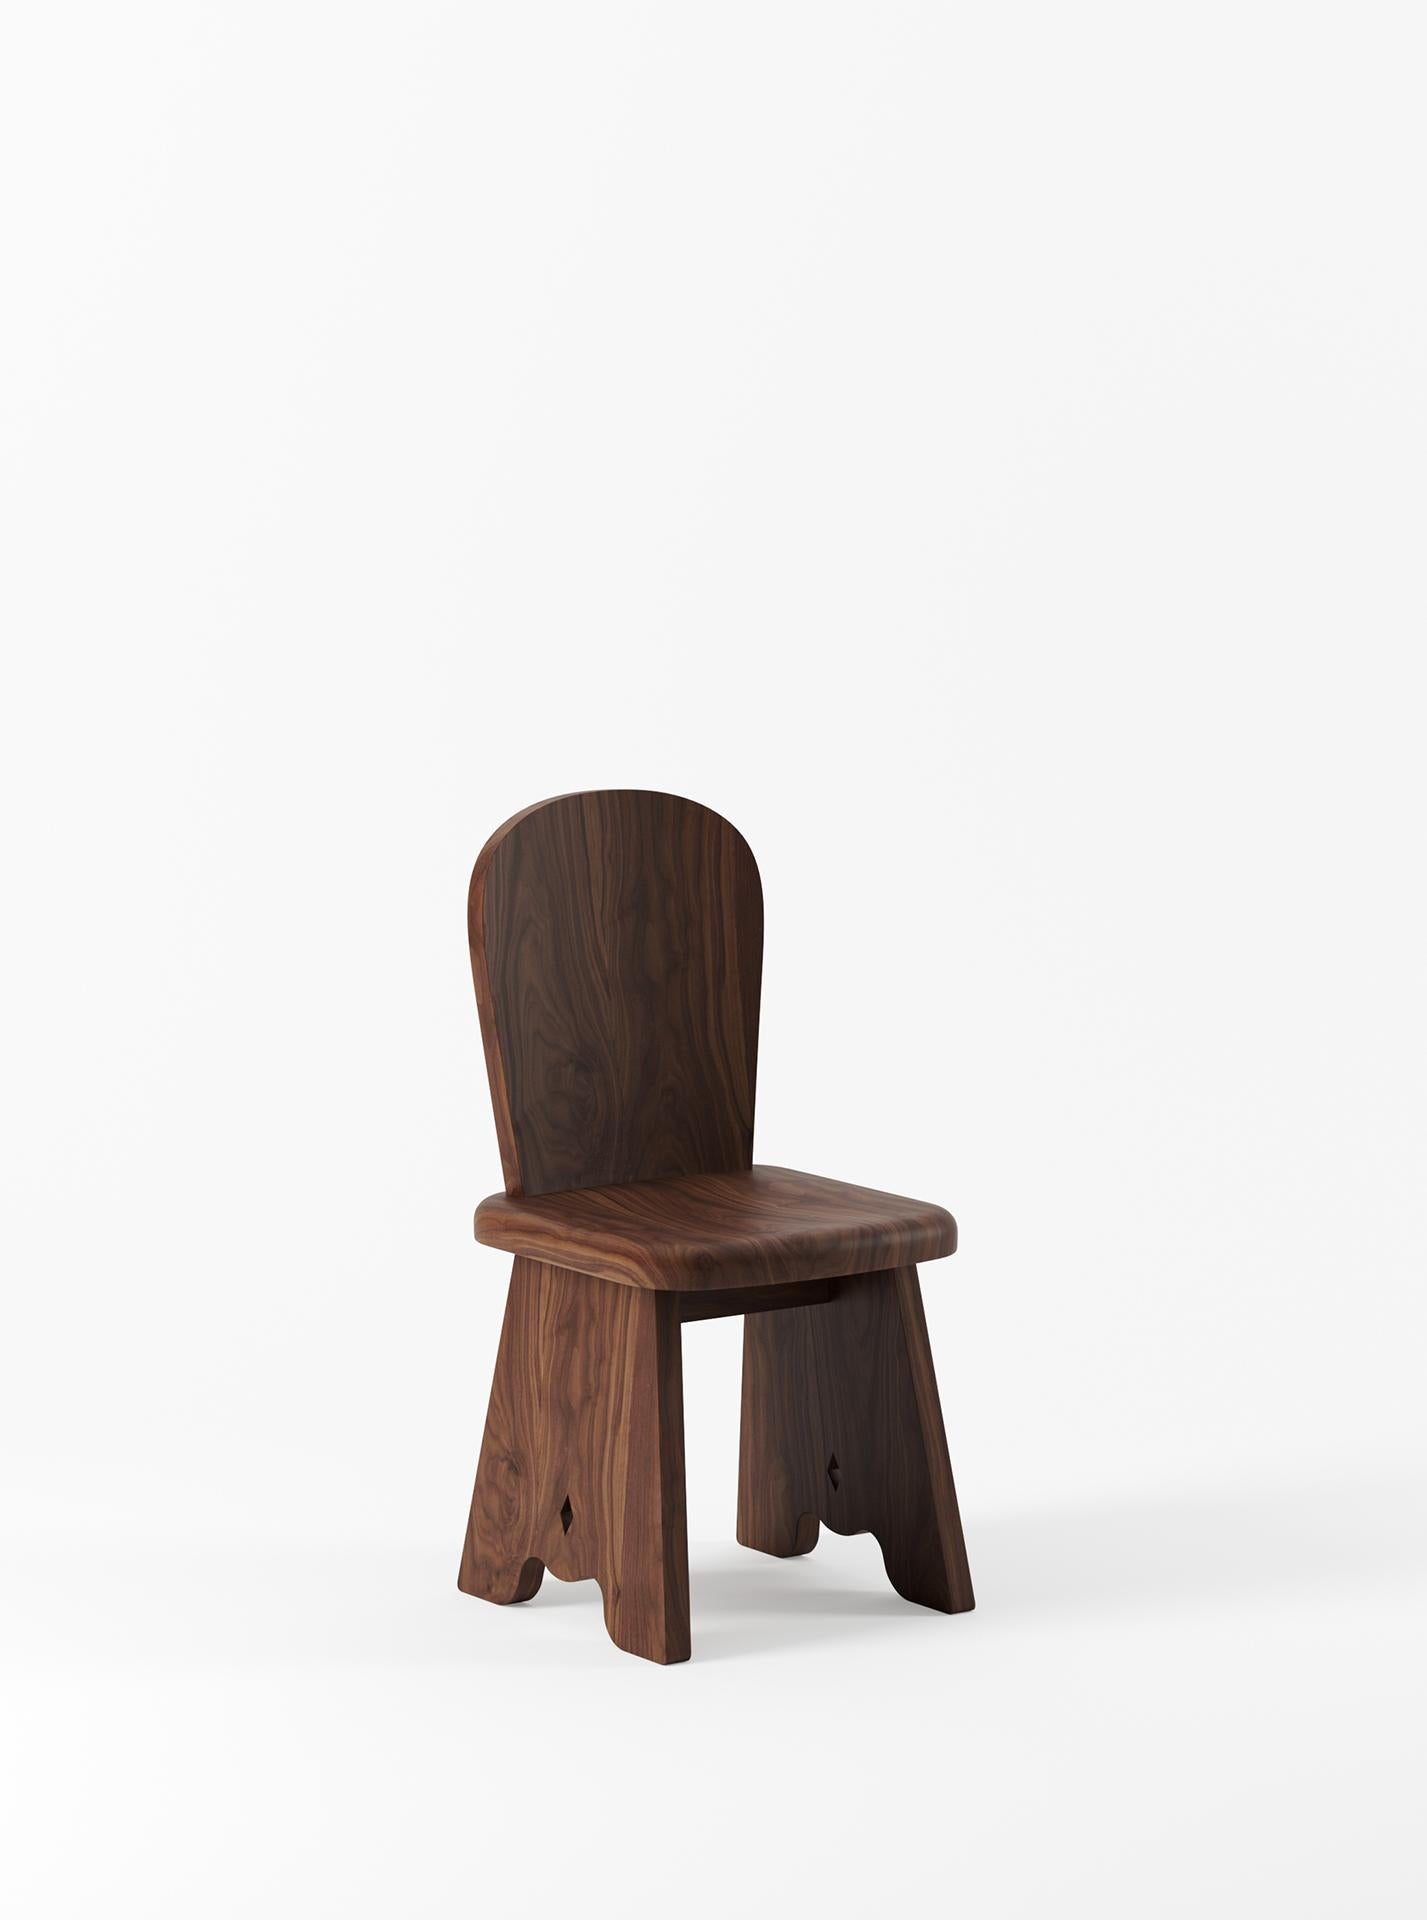 The Rambling Chair by Yaniv Chen nods to the silhouette of the traditional milk stool found in farms and Victorian homesteads throughout South Africa. For Chen, the stool is synonymous with childhood memories of visits to historic house museums and